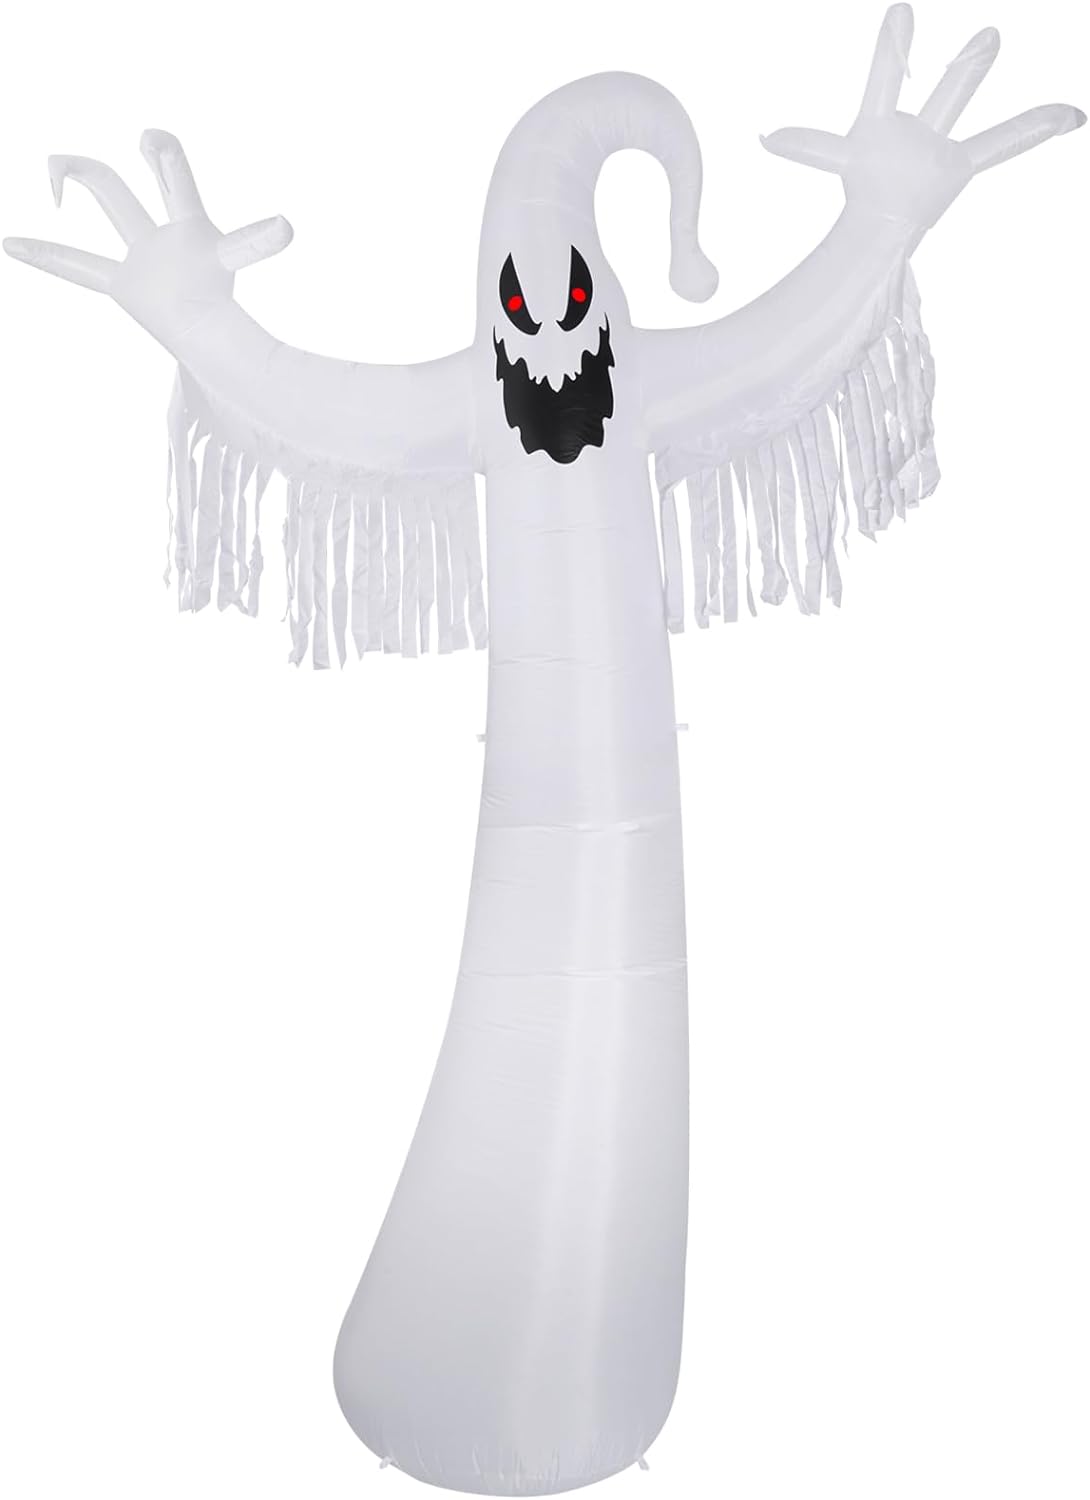 Sizonjoy 12 FT Halloween Decoration Inflatable Ghost, Blow Up Animated Red Eyes Ghost with Build-in LEDs, Outdoor Scary Inflatable Decoration for Front Yard, Porch, Lawm or Halloween Party